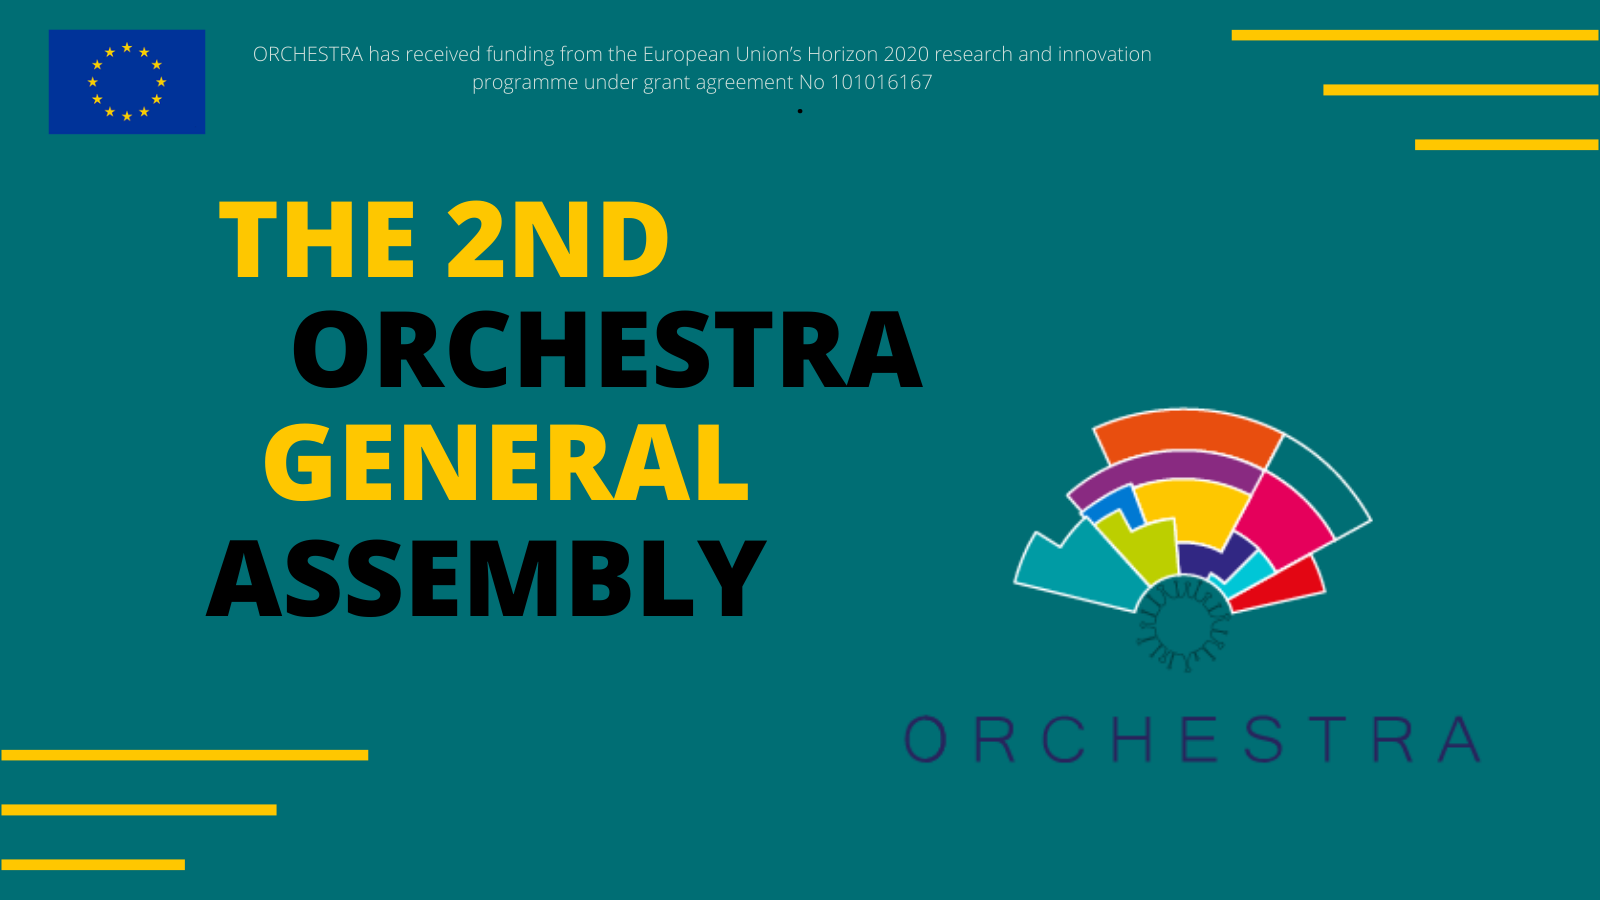 ORCHESTRA’s 2nd General Assembly